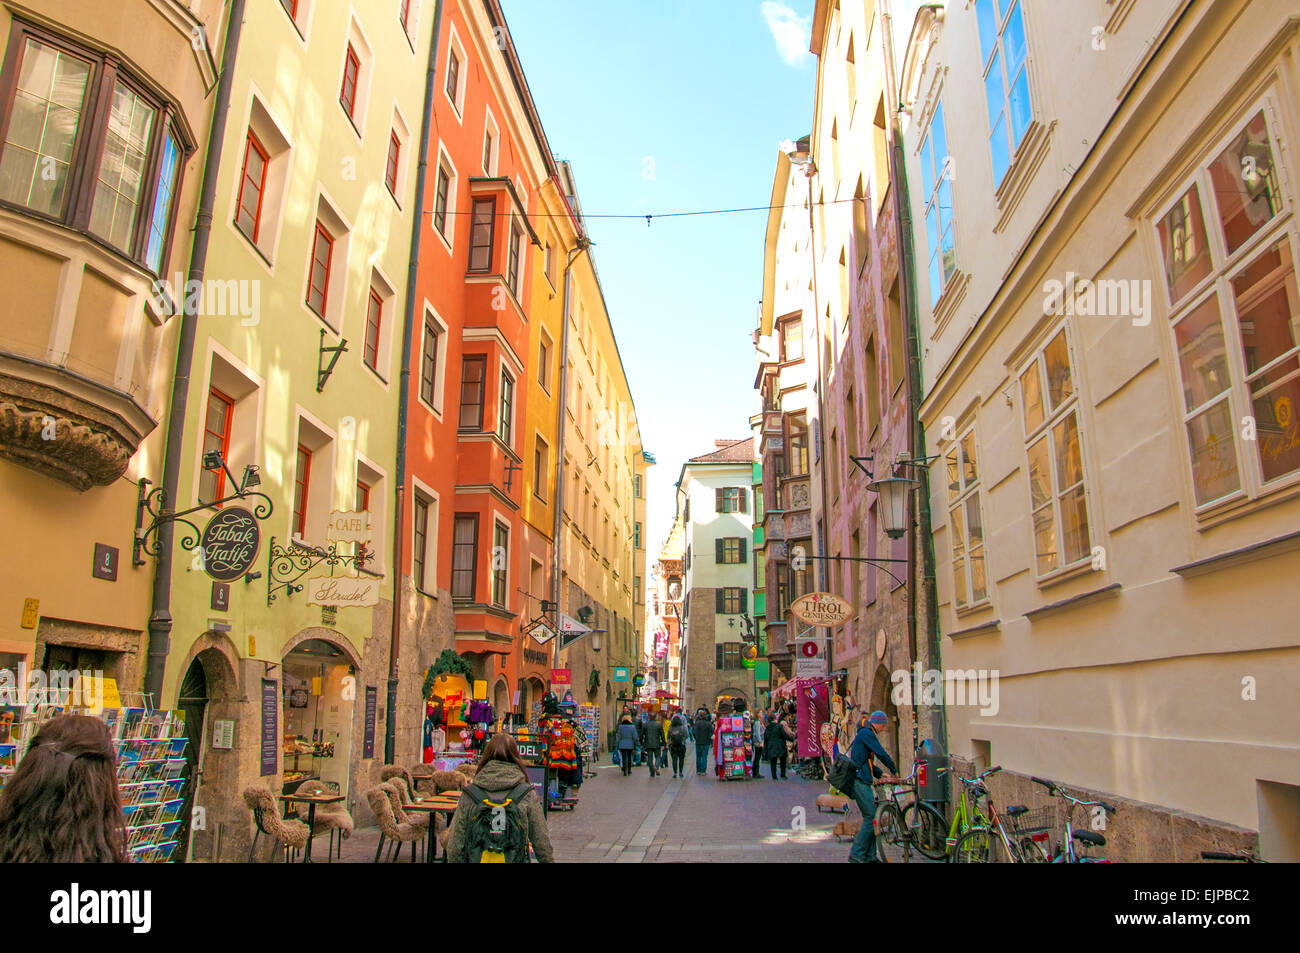 A tight European street in the town of Innsbruck, Austria that rests at the base of the Austrian Alps. Stock Photo